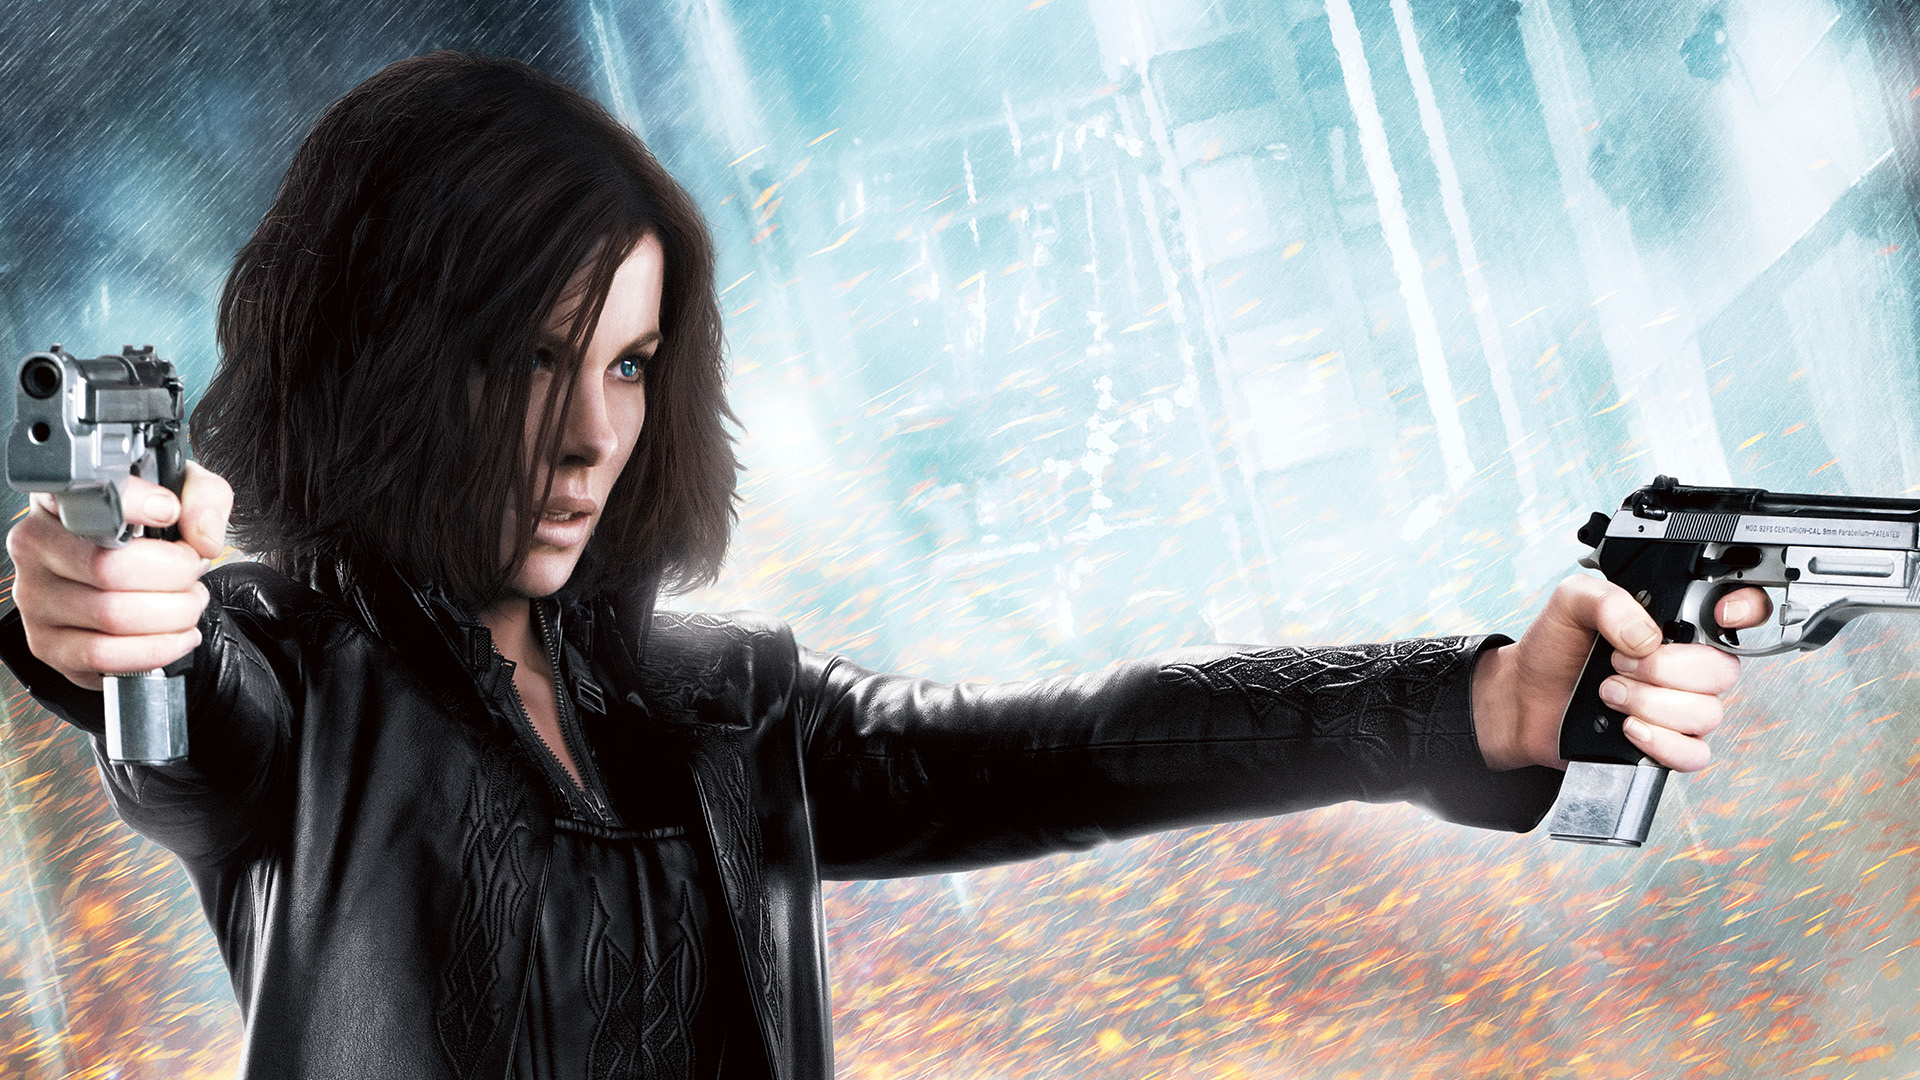 Selene (Underworld): Kate Beckinsale, Known for portrayal of another vampire fighter Anna Valerious in Van Helsing. 1920x1080 Full HD Background.